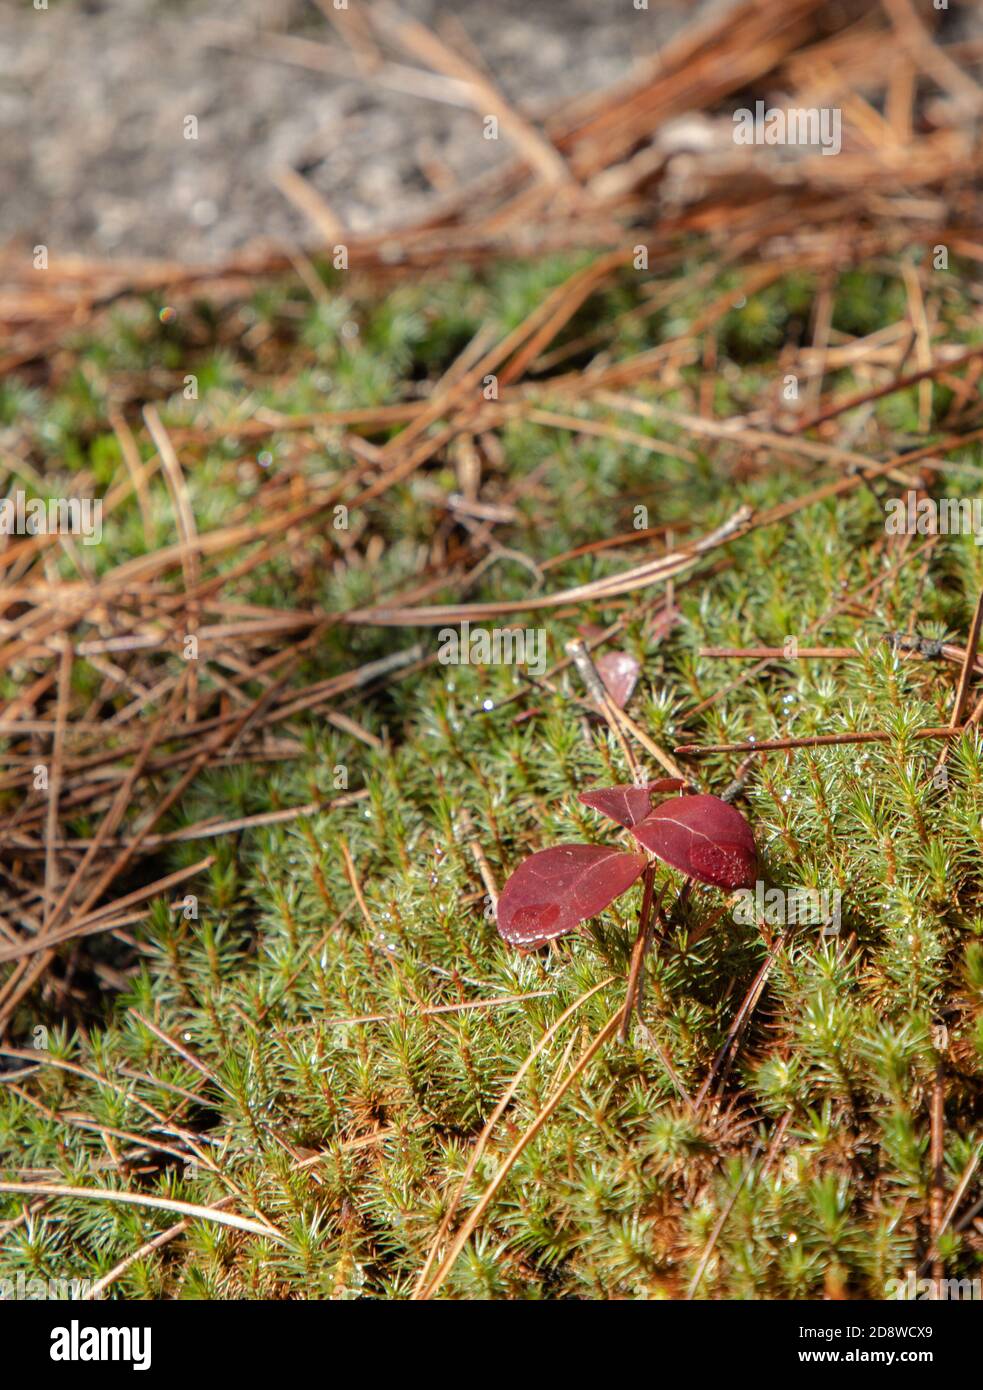 Pine needles and club moss (Lycopodiopsida) up close on rock Stock Photo